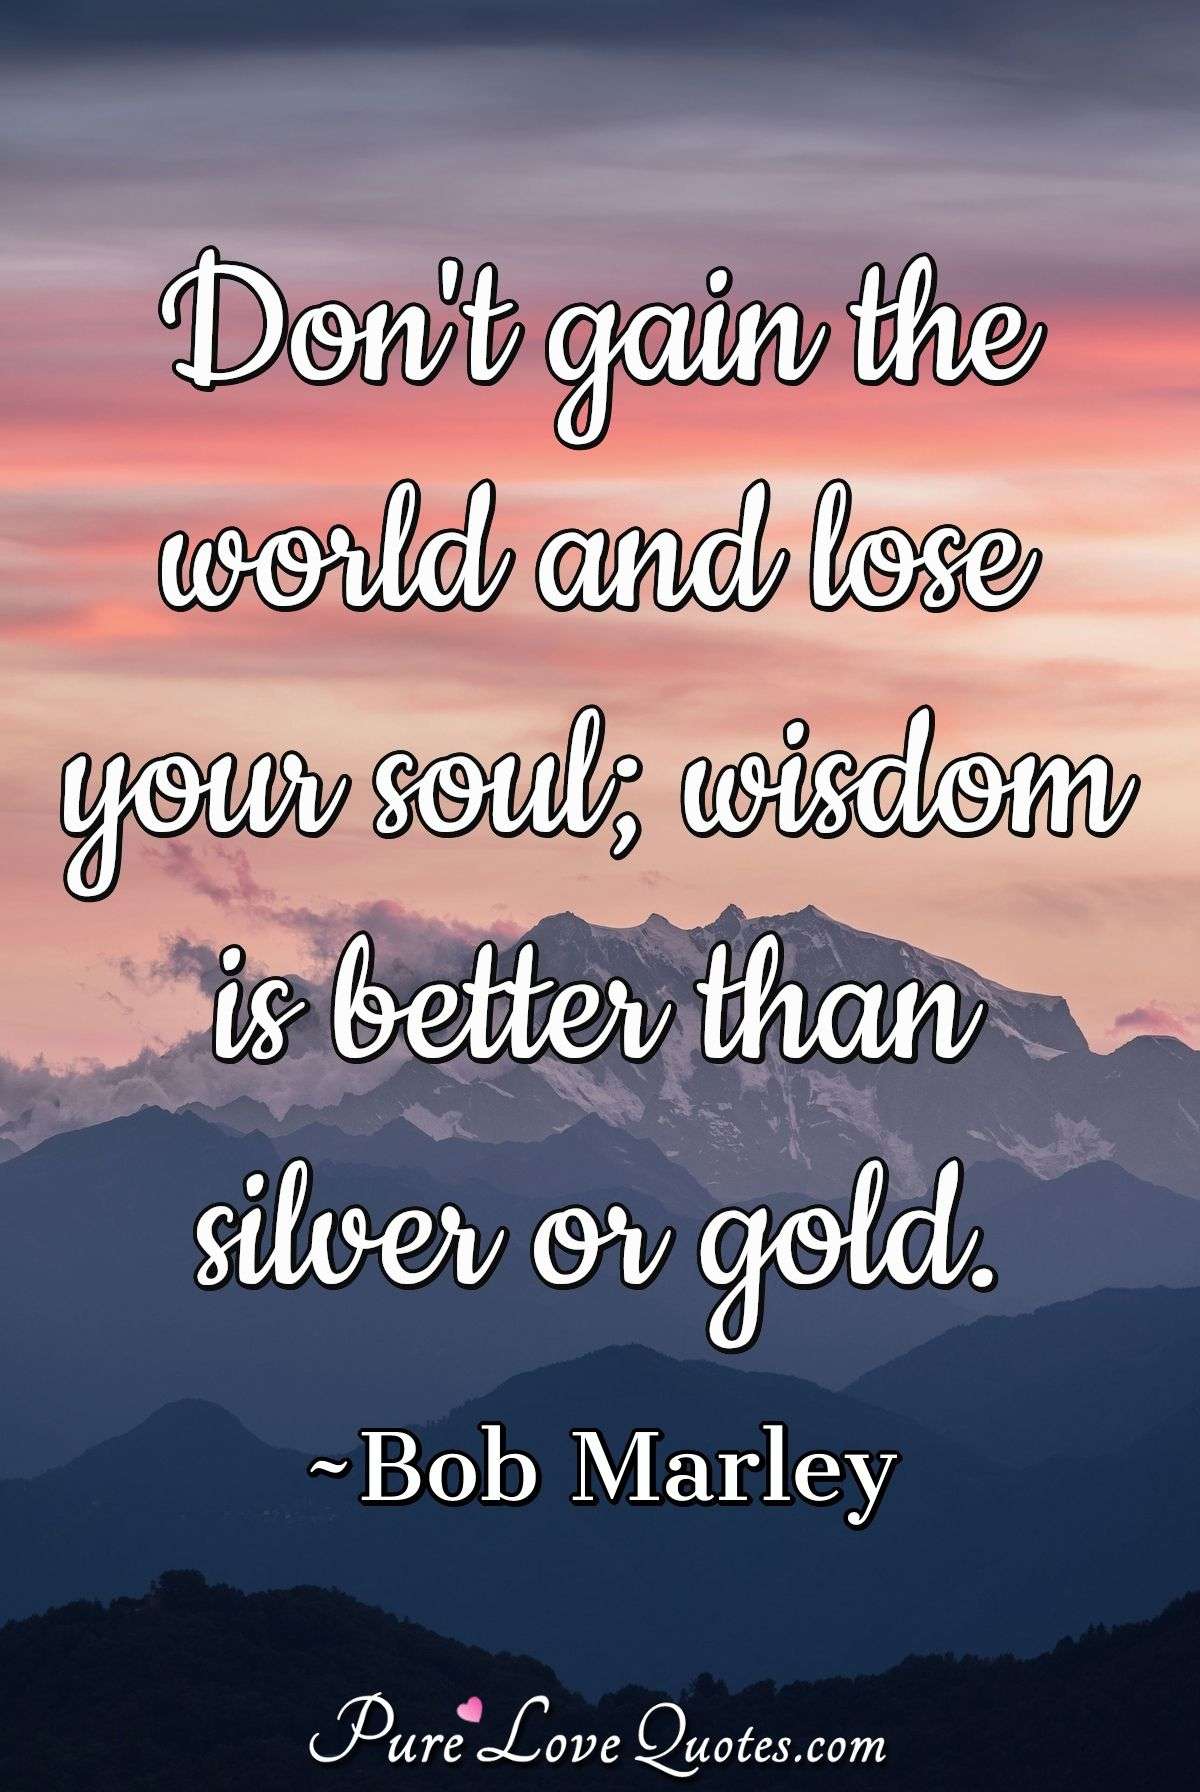 Don't gain the world and lose your soul wisdom is better than silver or gold. - Bob Marley